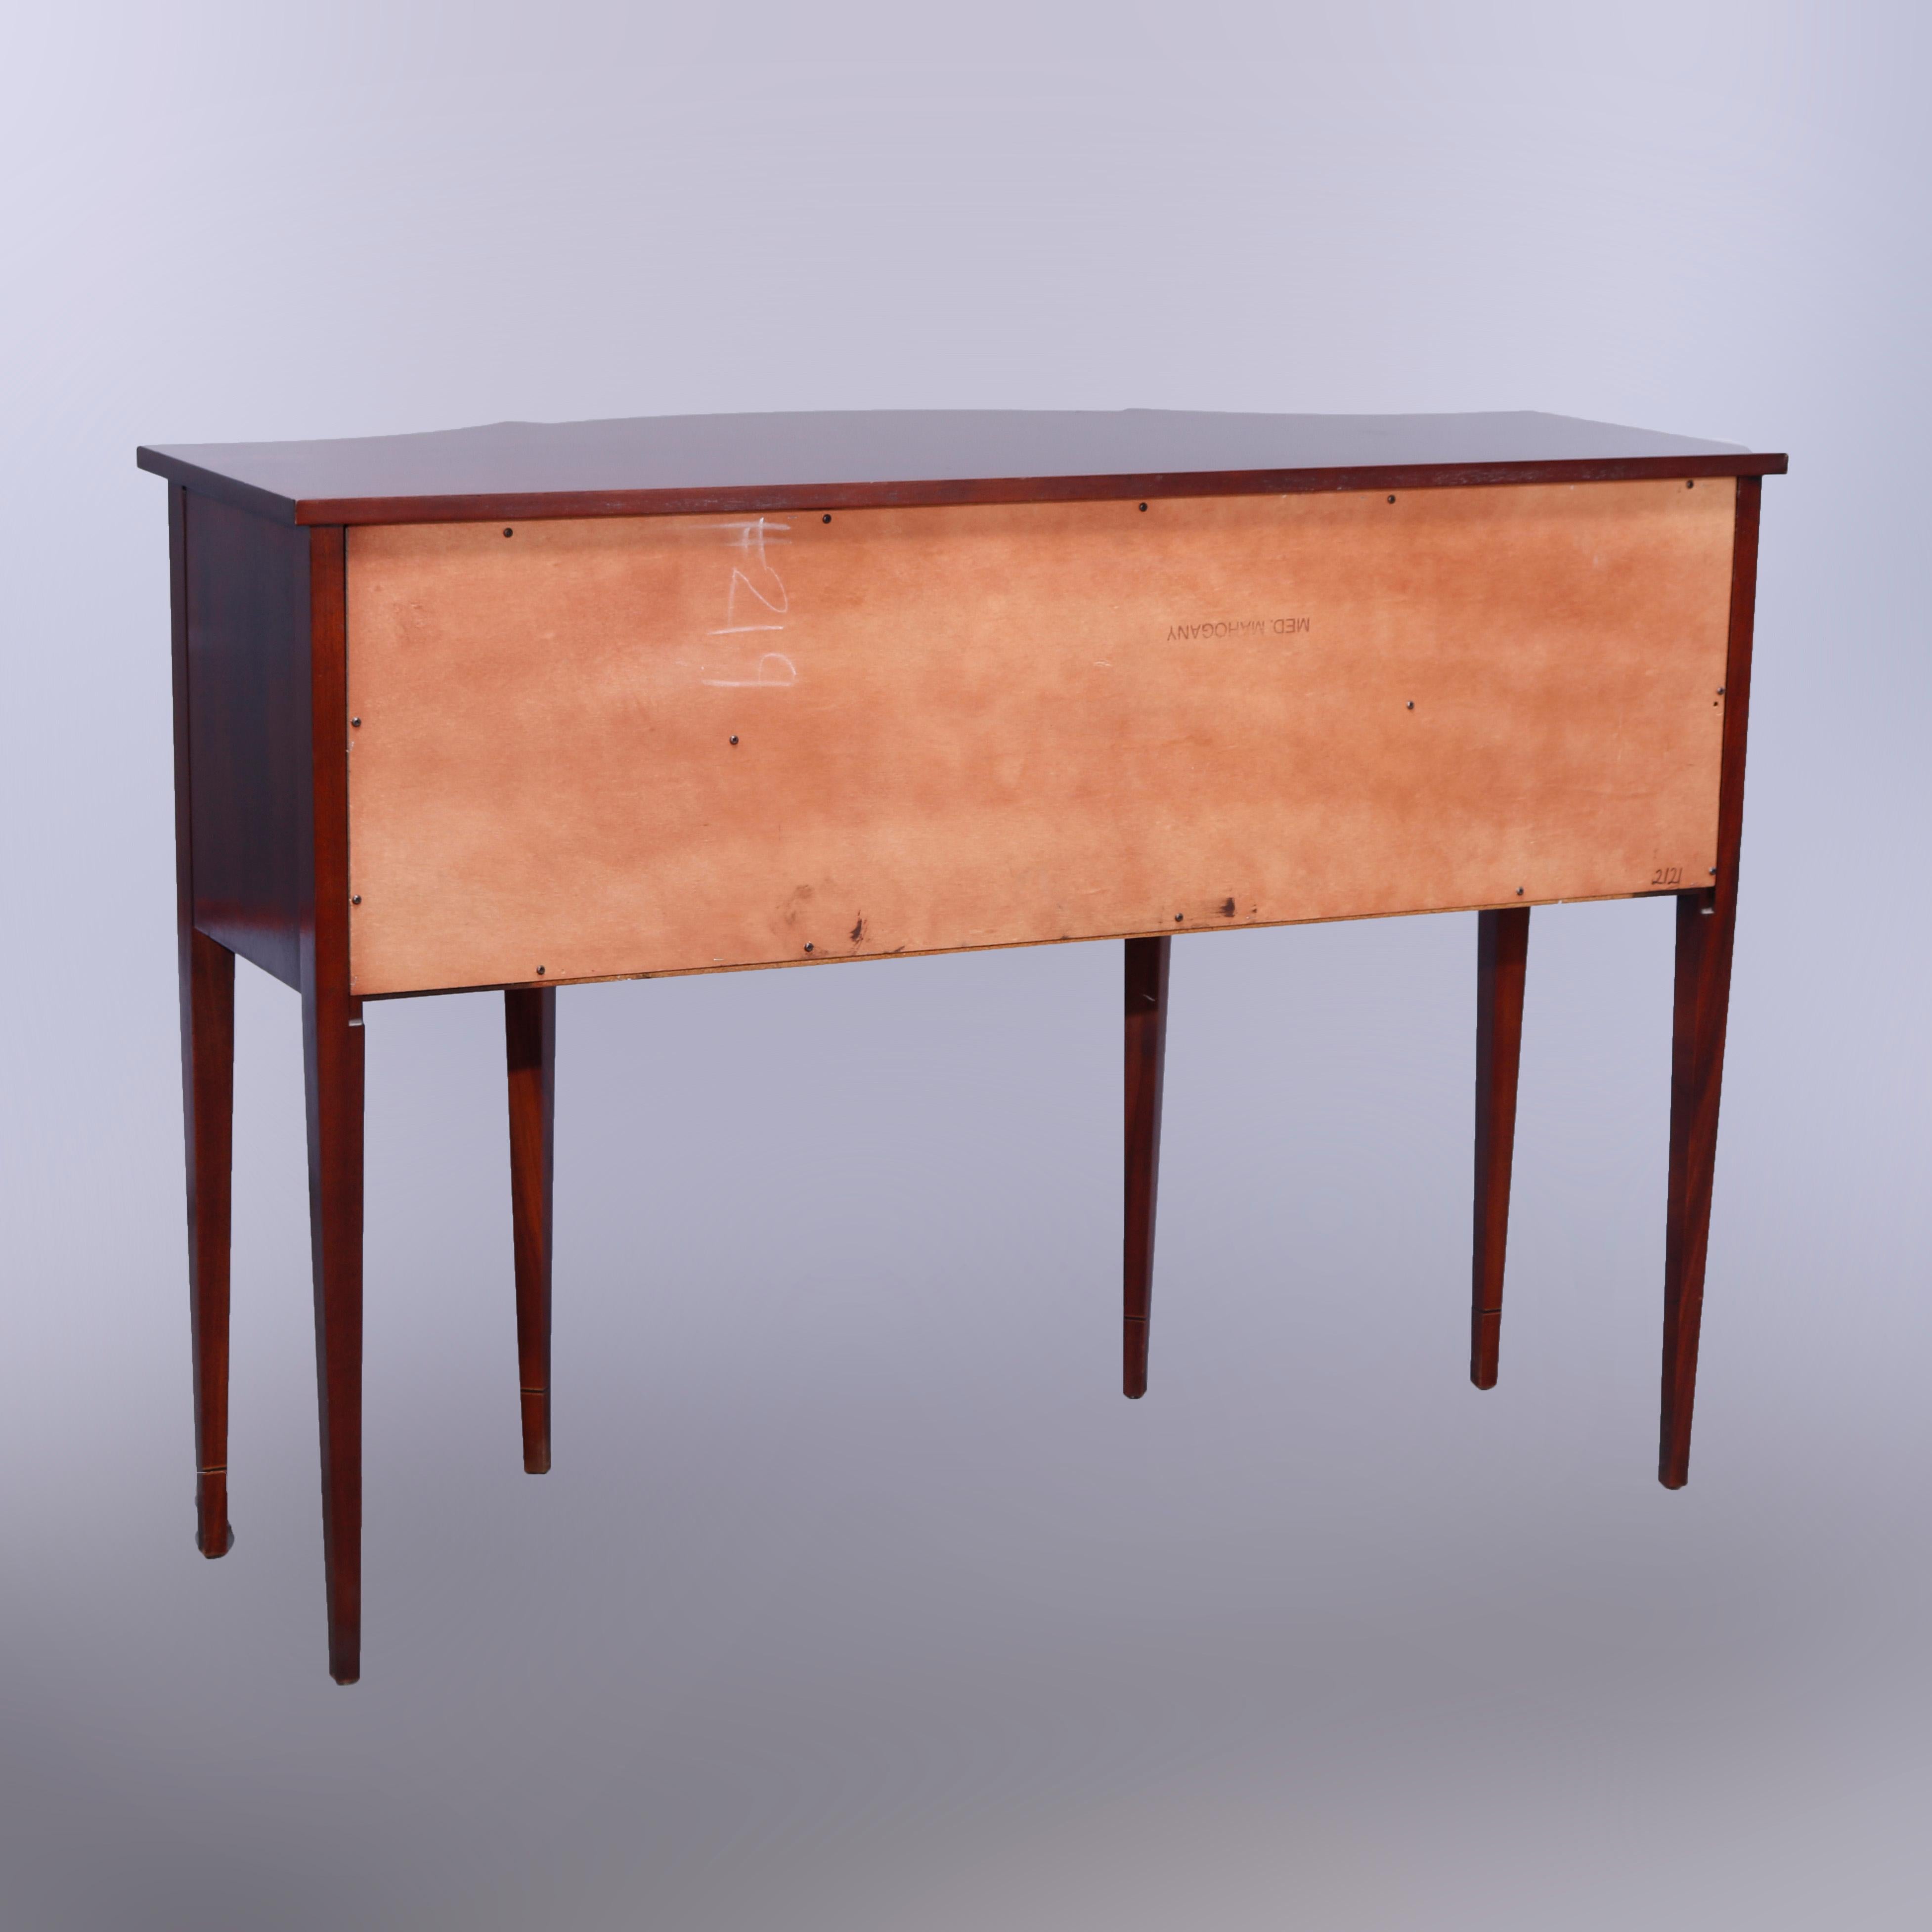 Hepplewhite Style Hickory Chair Inlaid Mahogany Silver Server Sideboard 20th C 7